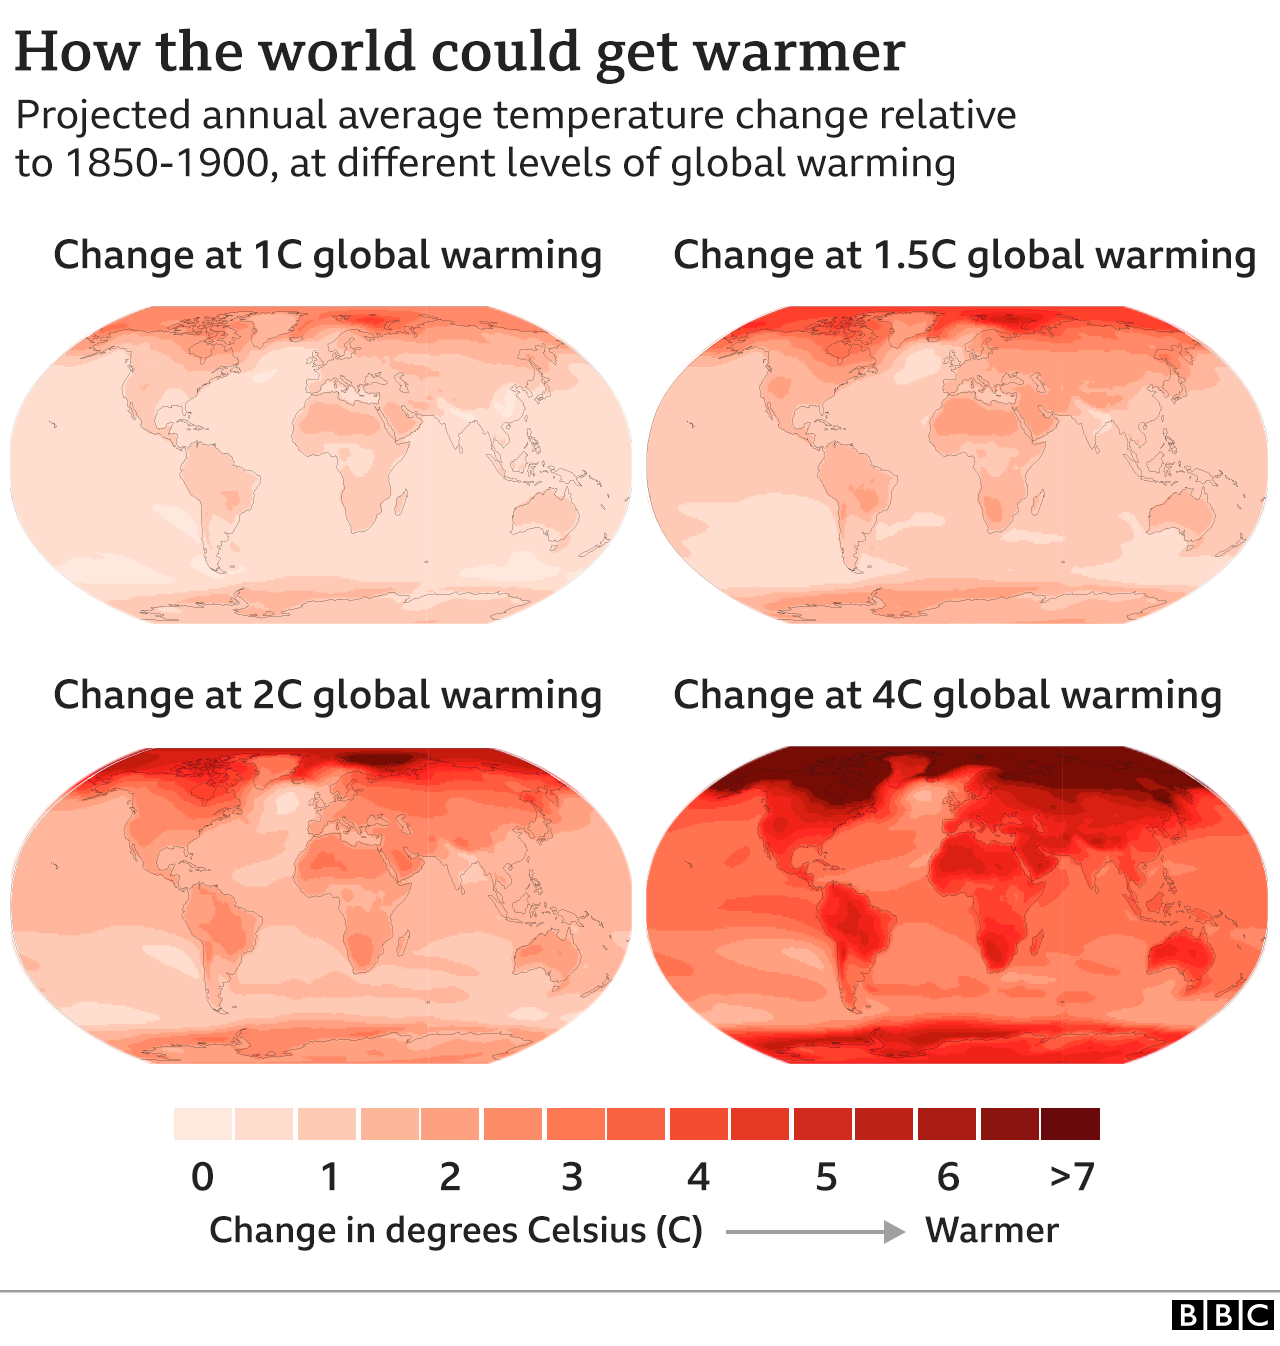 otte princip smid væk Climate change: IPCC report is 'code red for humanity' - BBC News